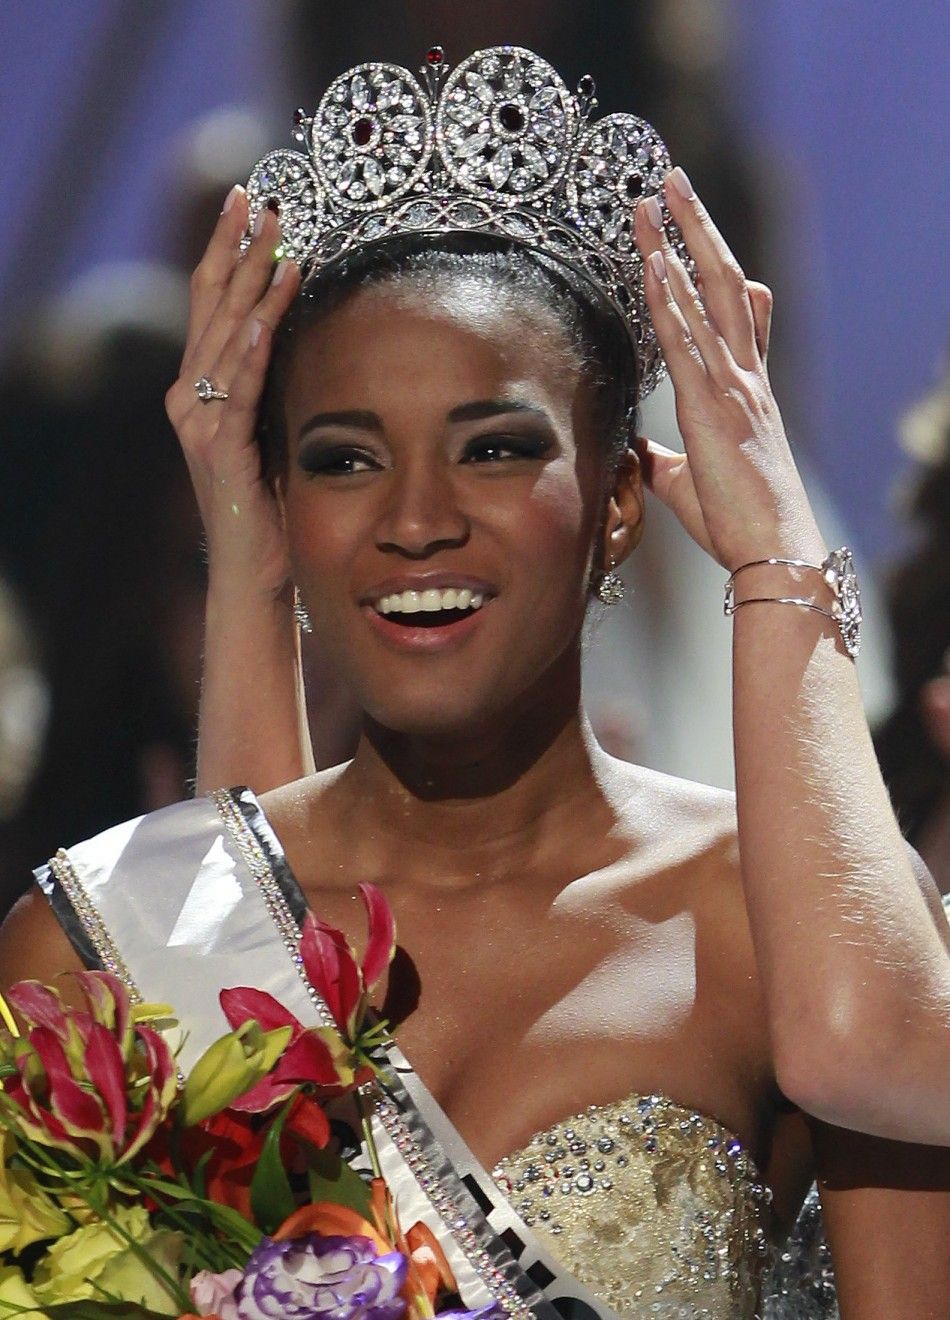 Miss Angola Leila Lopes is crowned by Miss Universe 2010 Ximena Navarrete of Mexico after being named Miss Universe 2011 during the Miss Universe pageant in Sao Paulo 